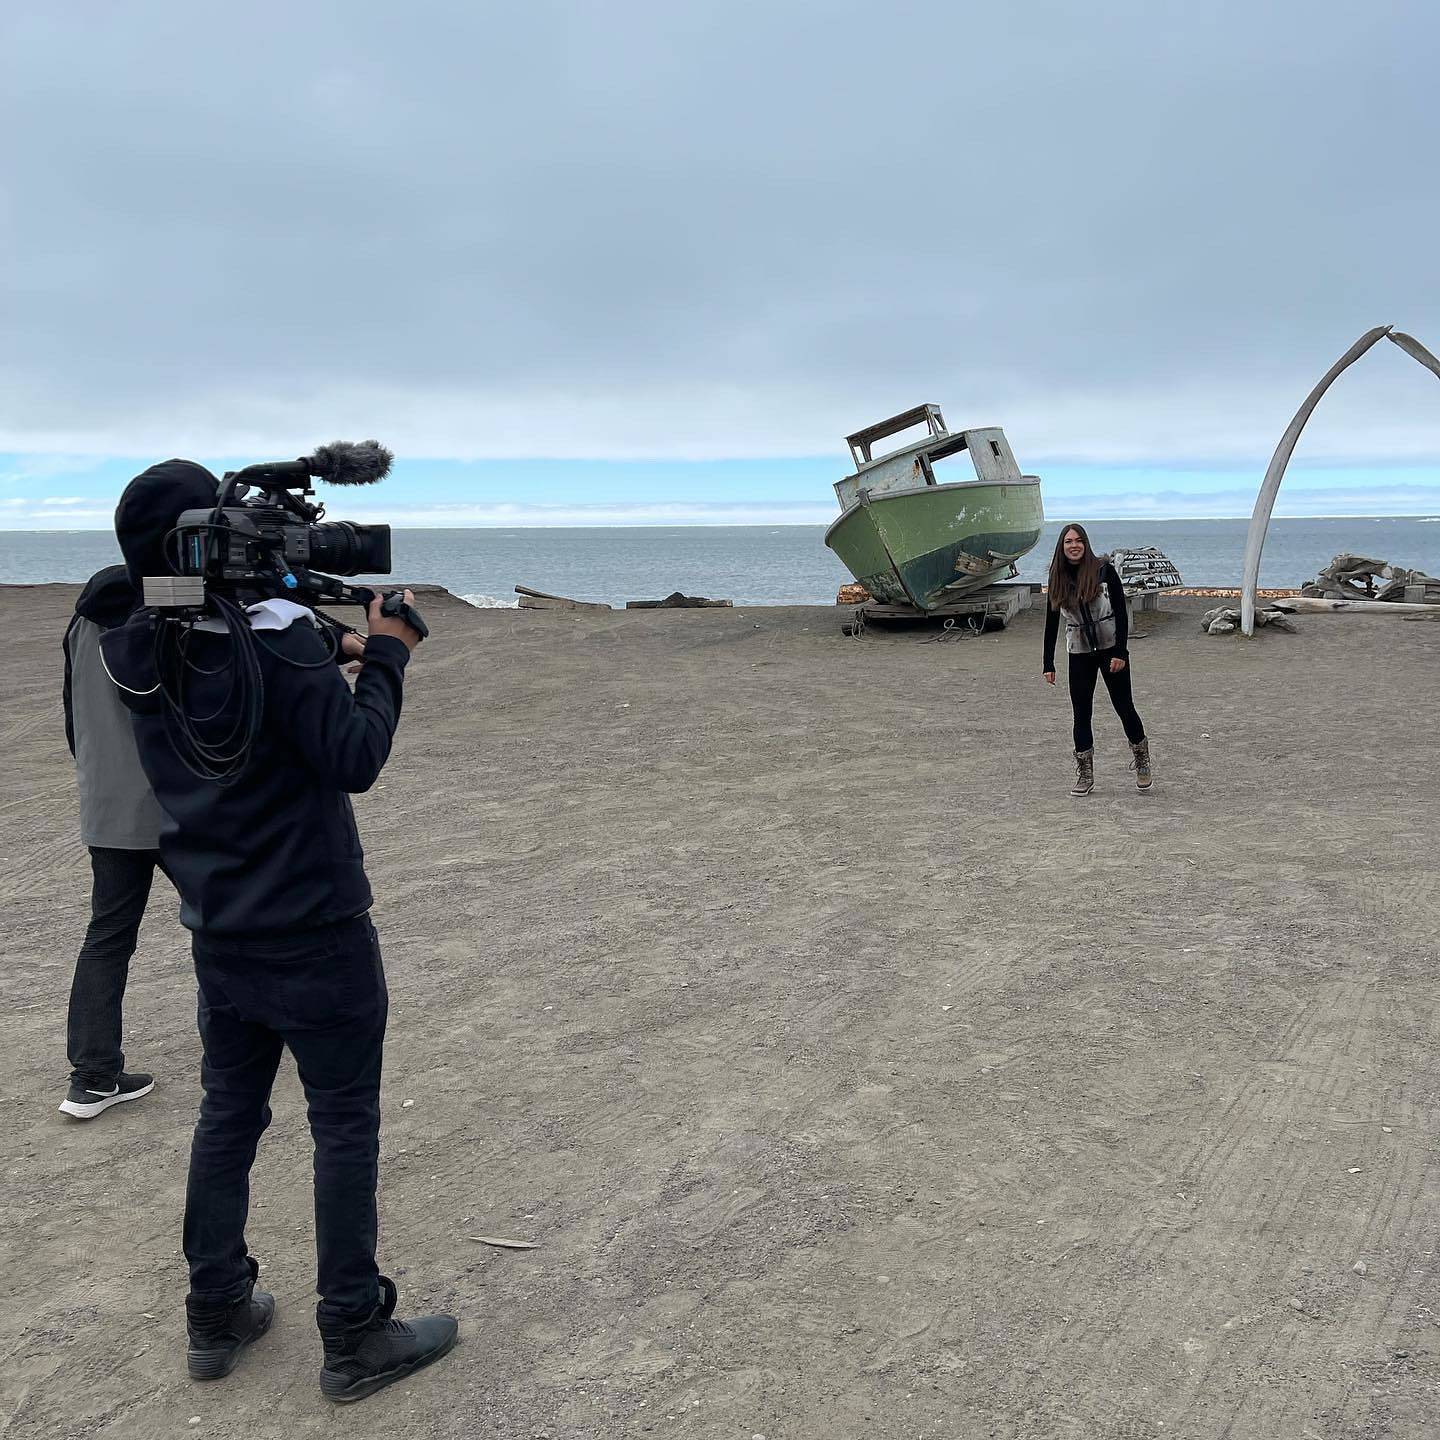 Alyssa London and her team, shown here shooting a trailer in Utqiagvik, are working to produce Culture Story, which will showcase modern Alaska Native cultures across and outside of Alaska. (Courtesy photo / Culture Story)